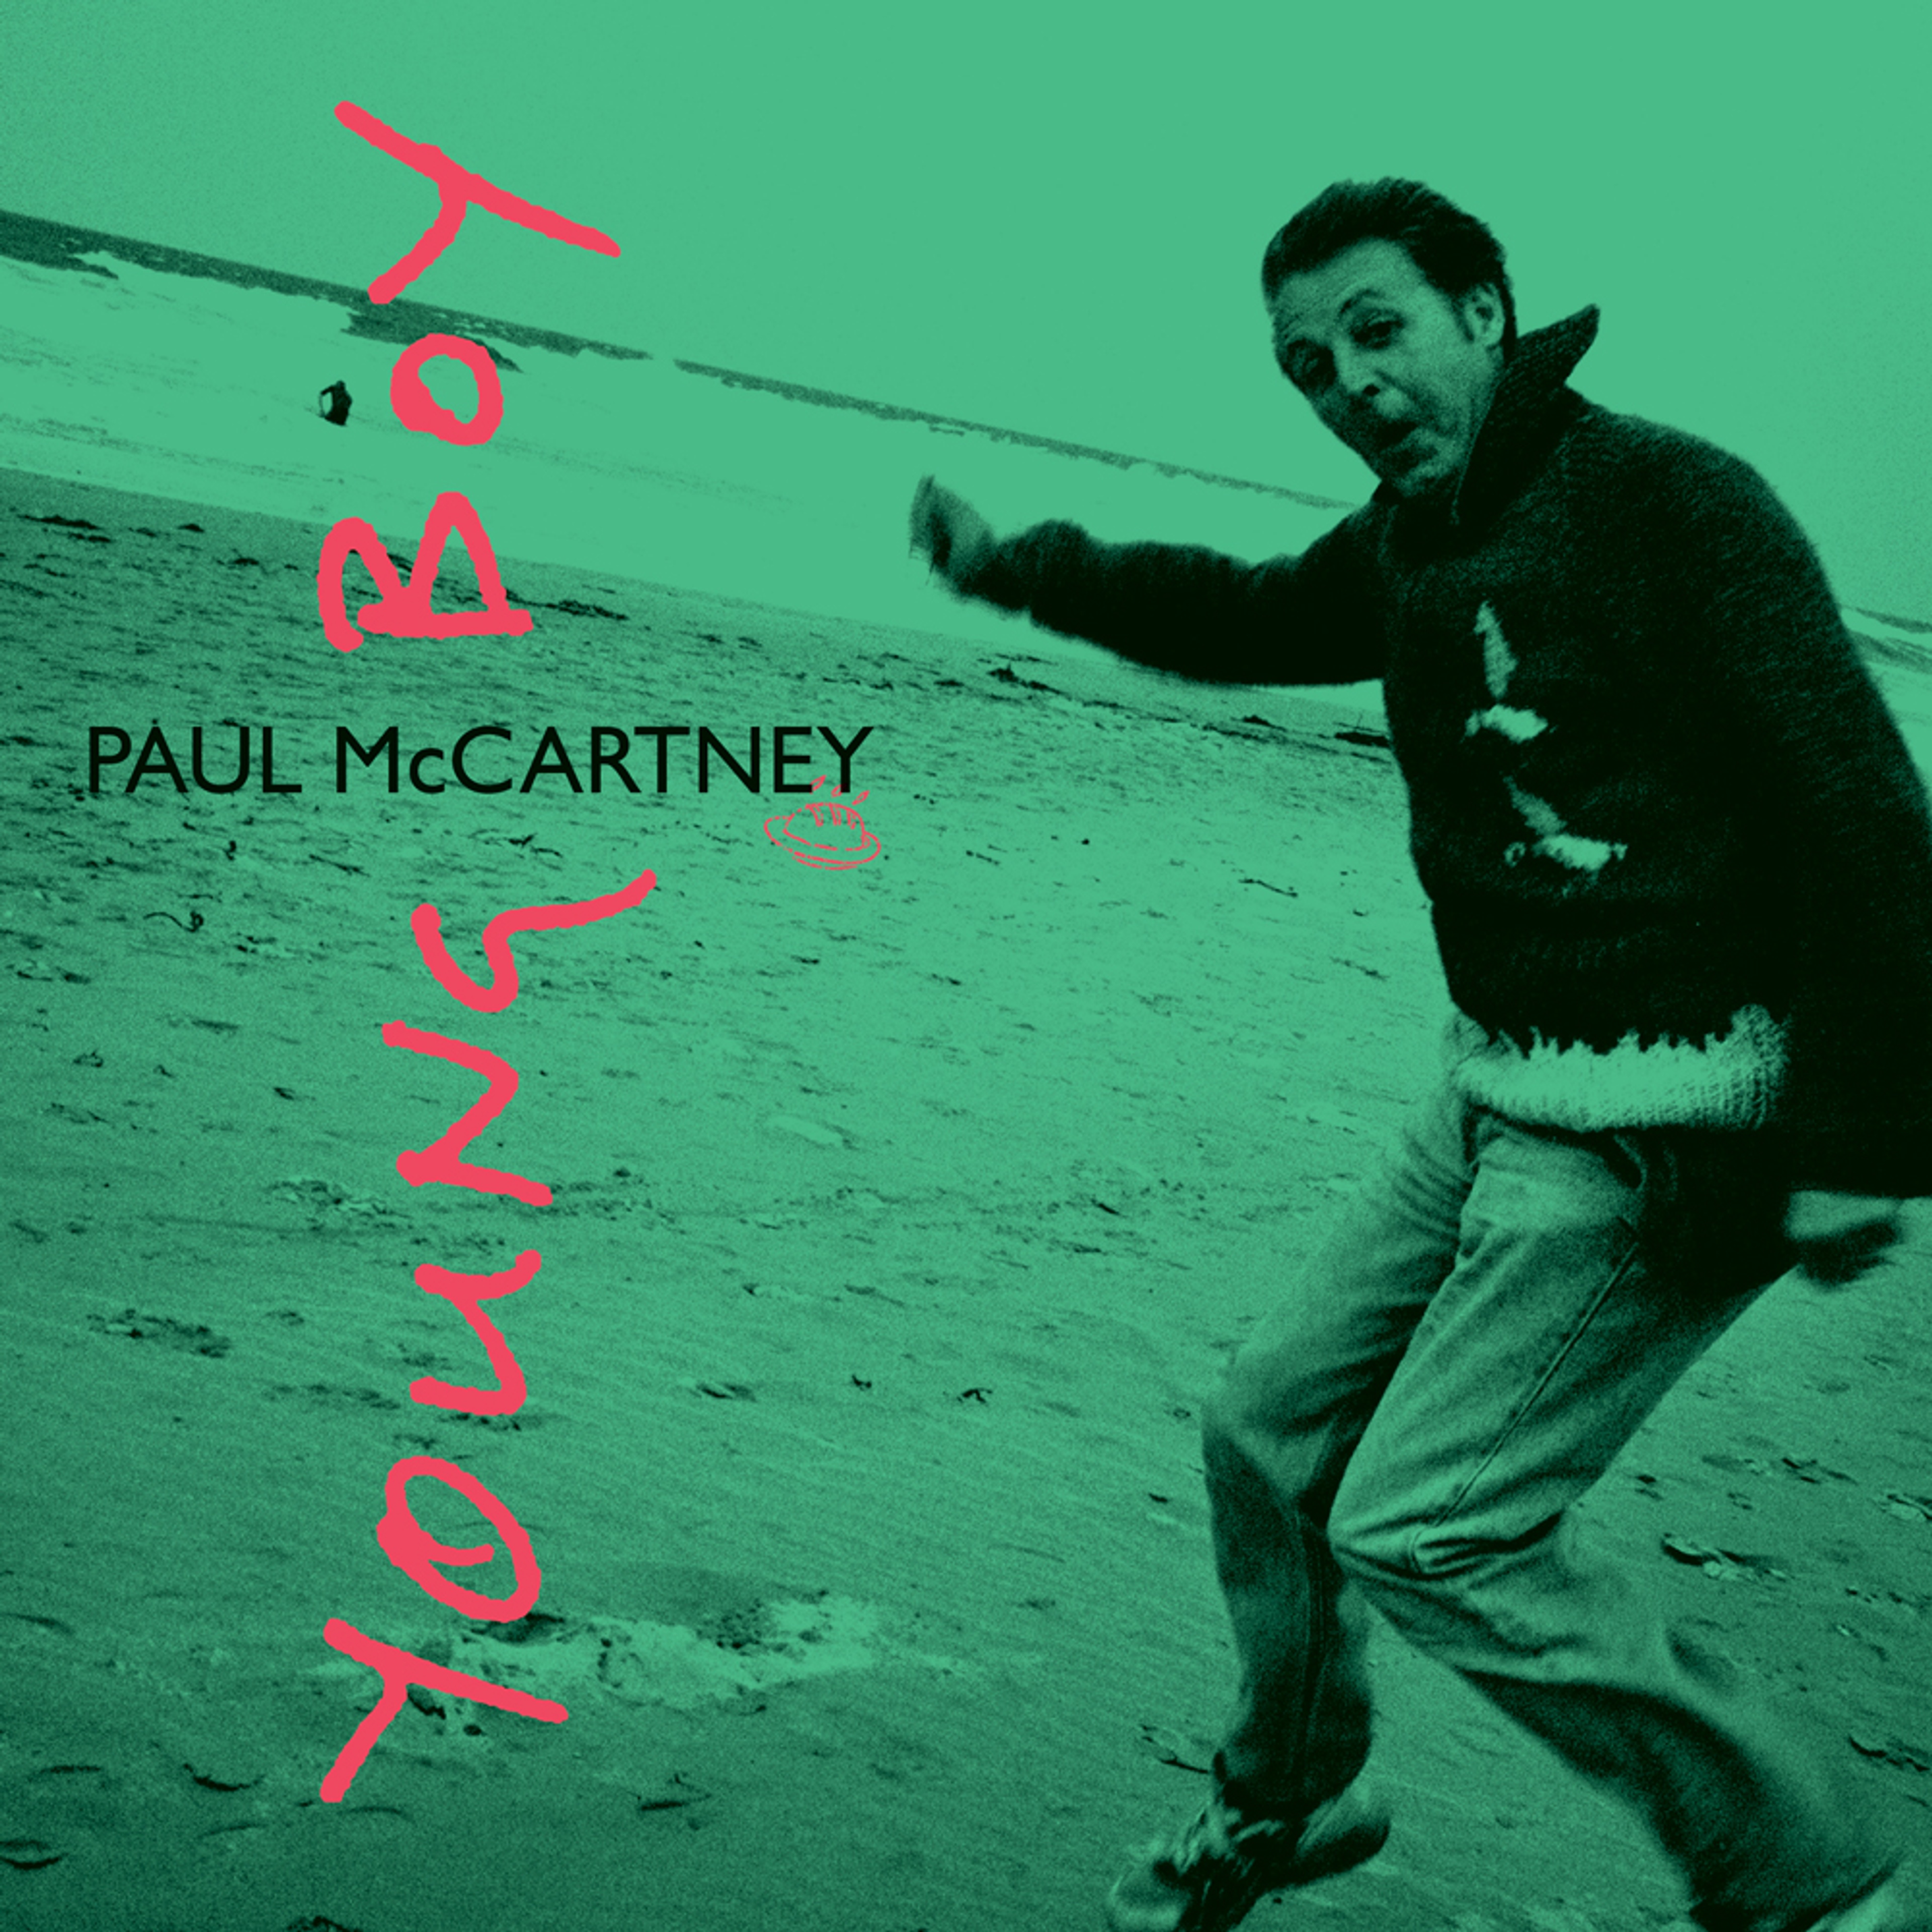 “Young Boy” Single artwork as featured in 'The 7" Singles Box